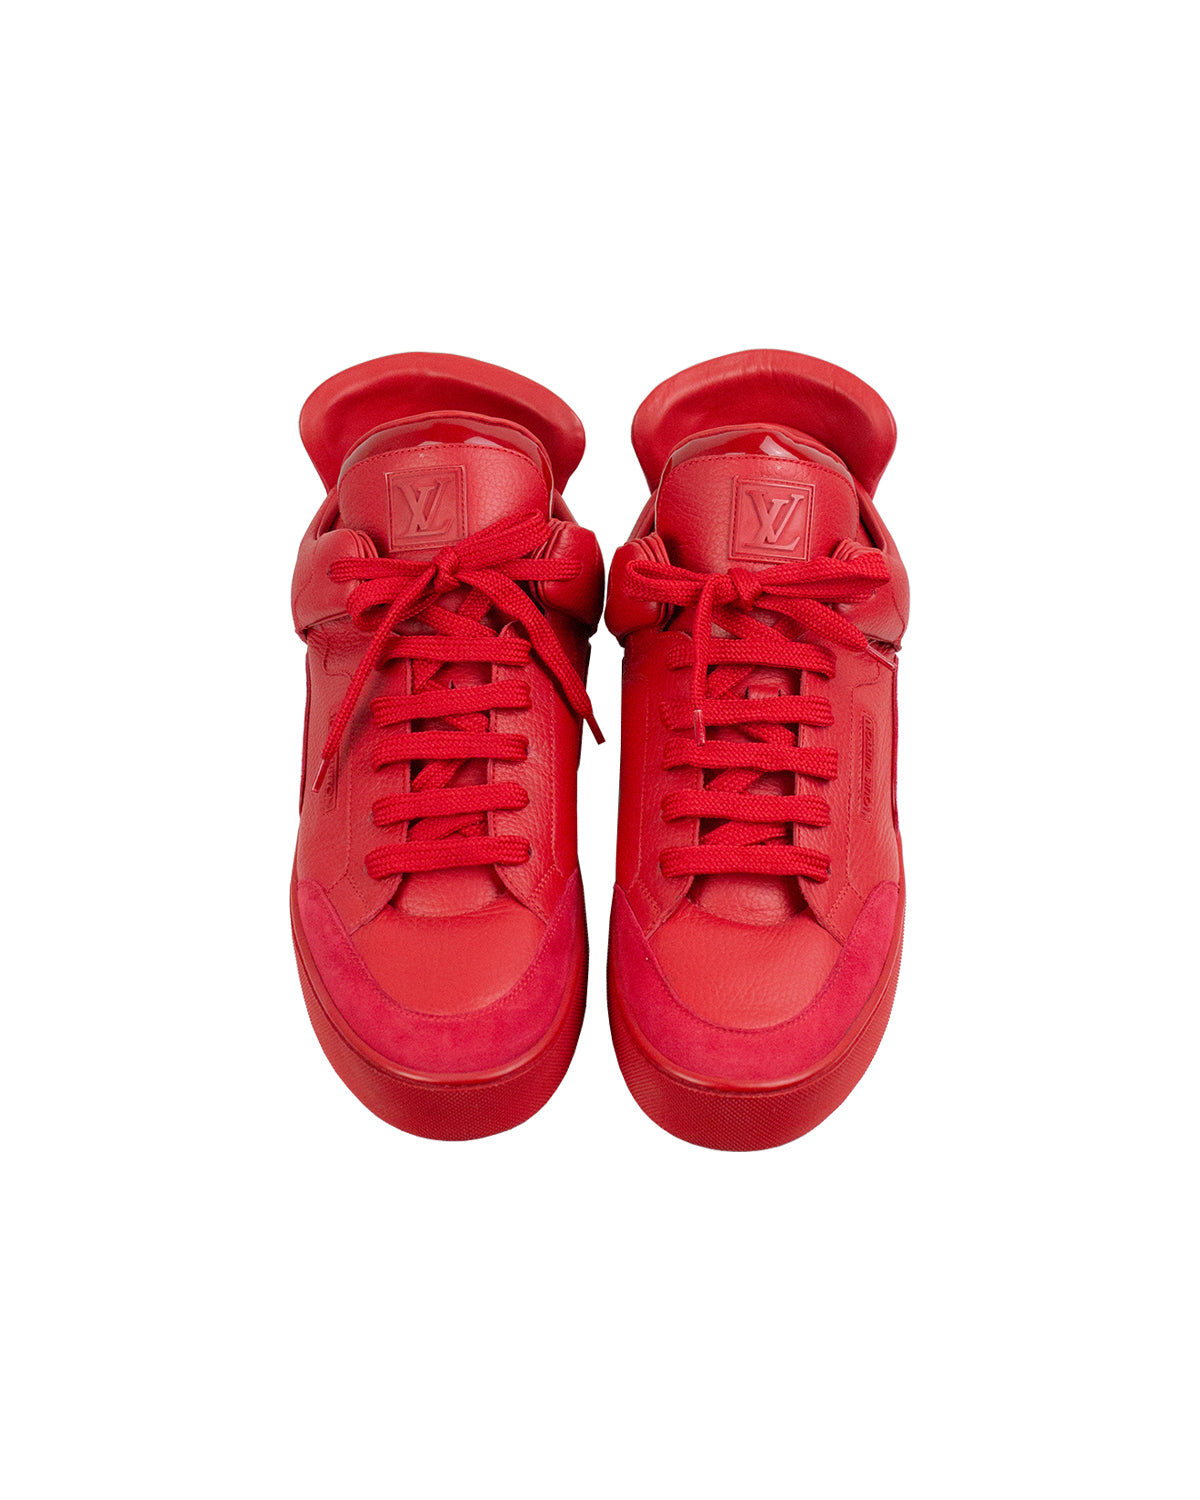 Buy Louis Vuitton × KANYE WEST DONS SNEAKER RED Kanye West Dons